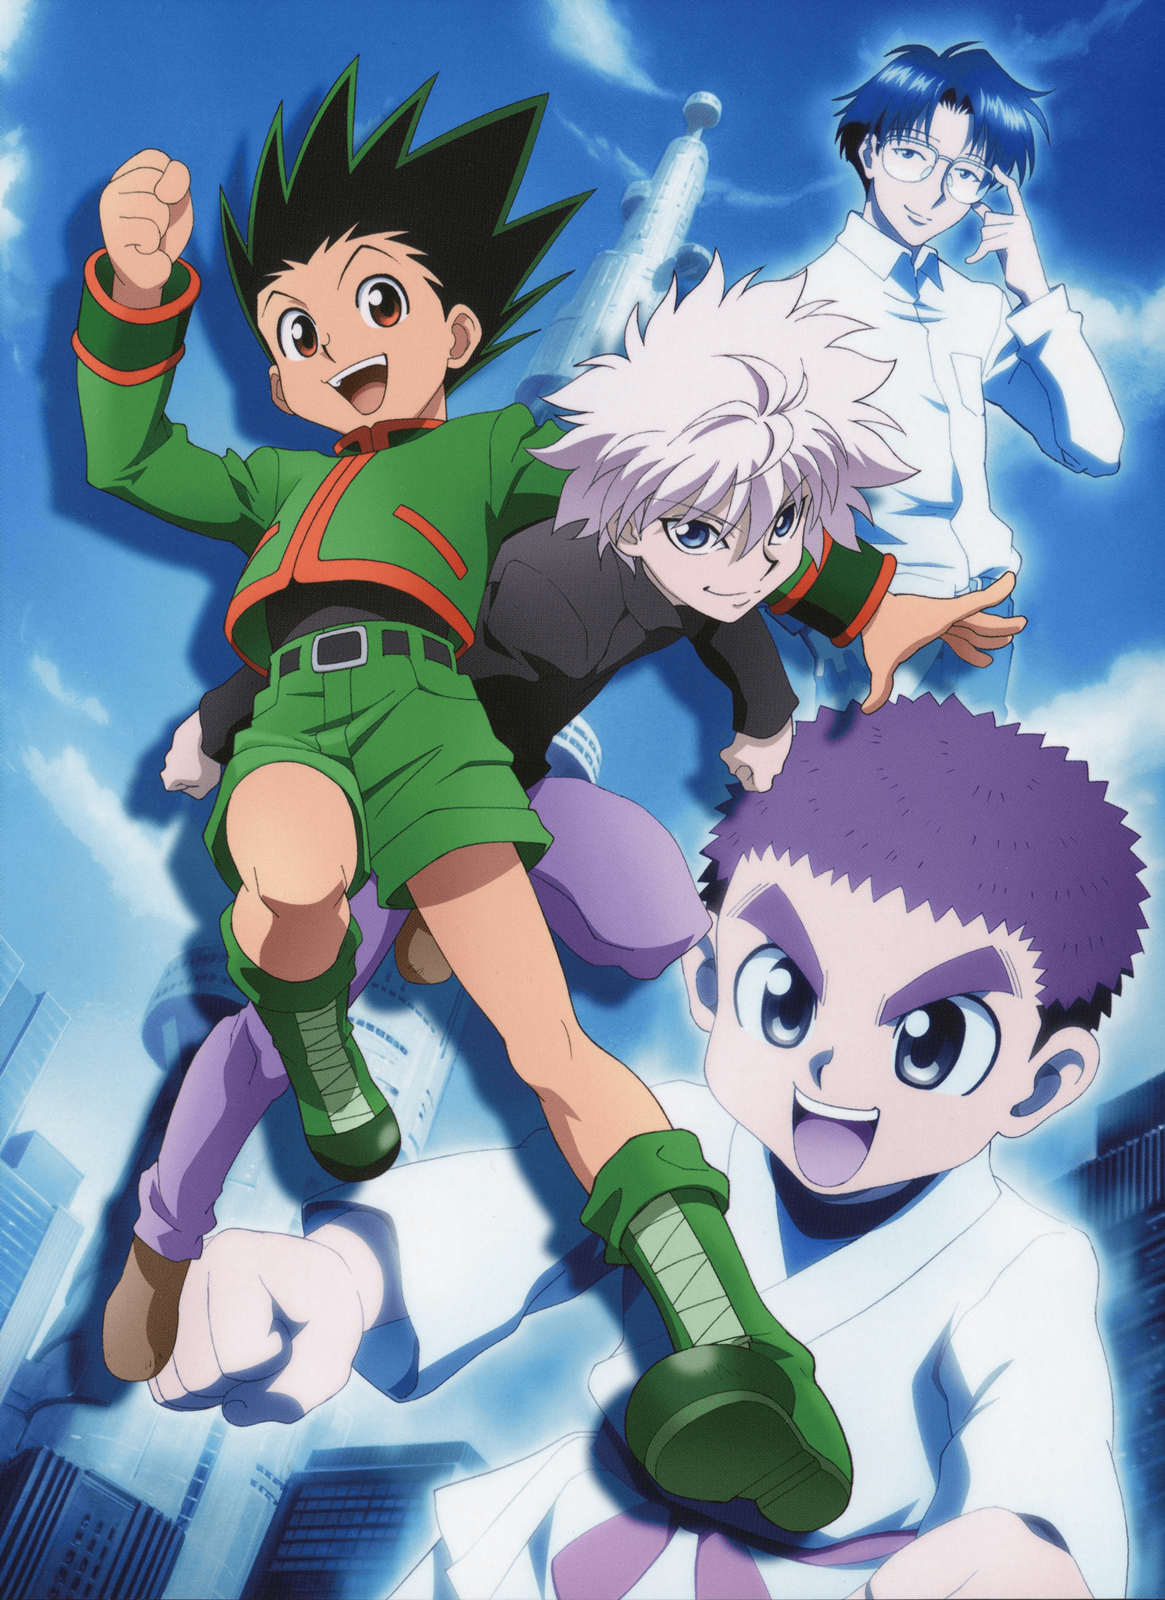 Will Hunter x Hunter (anime not manga) continue (past episode 148)? I don't  want it to be over. - Quora